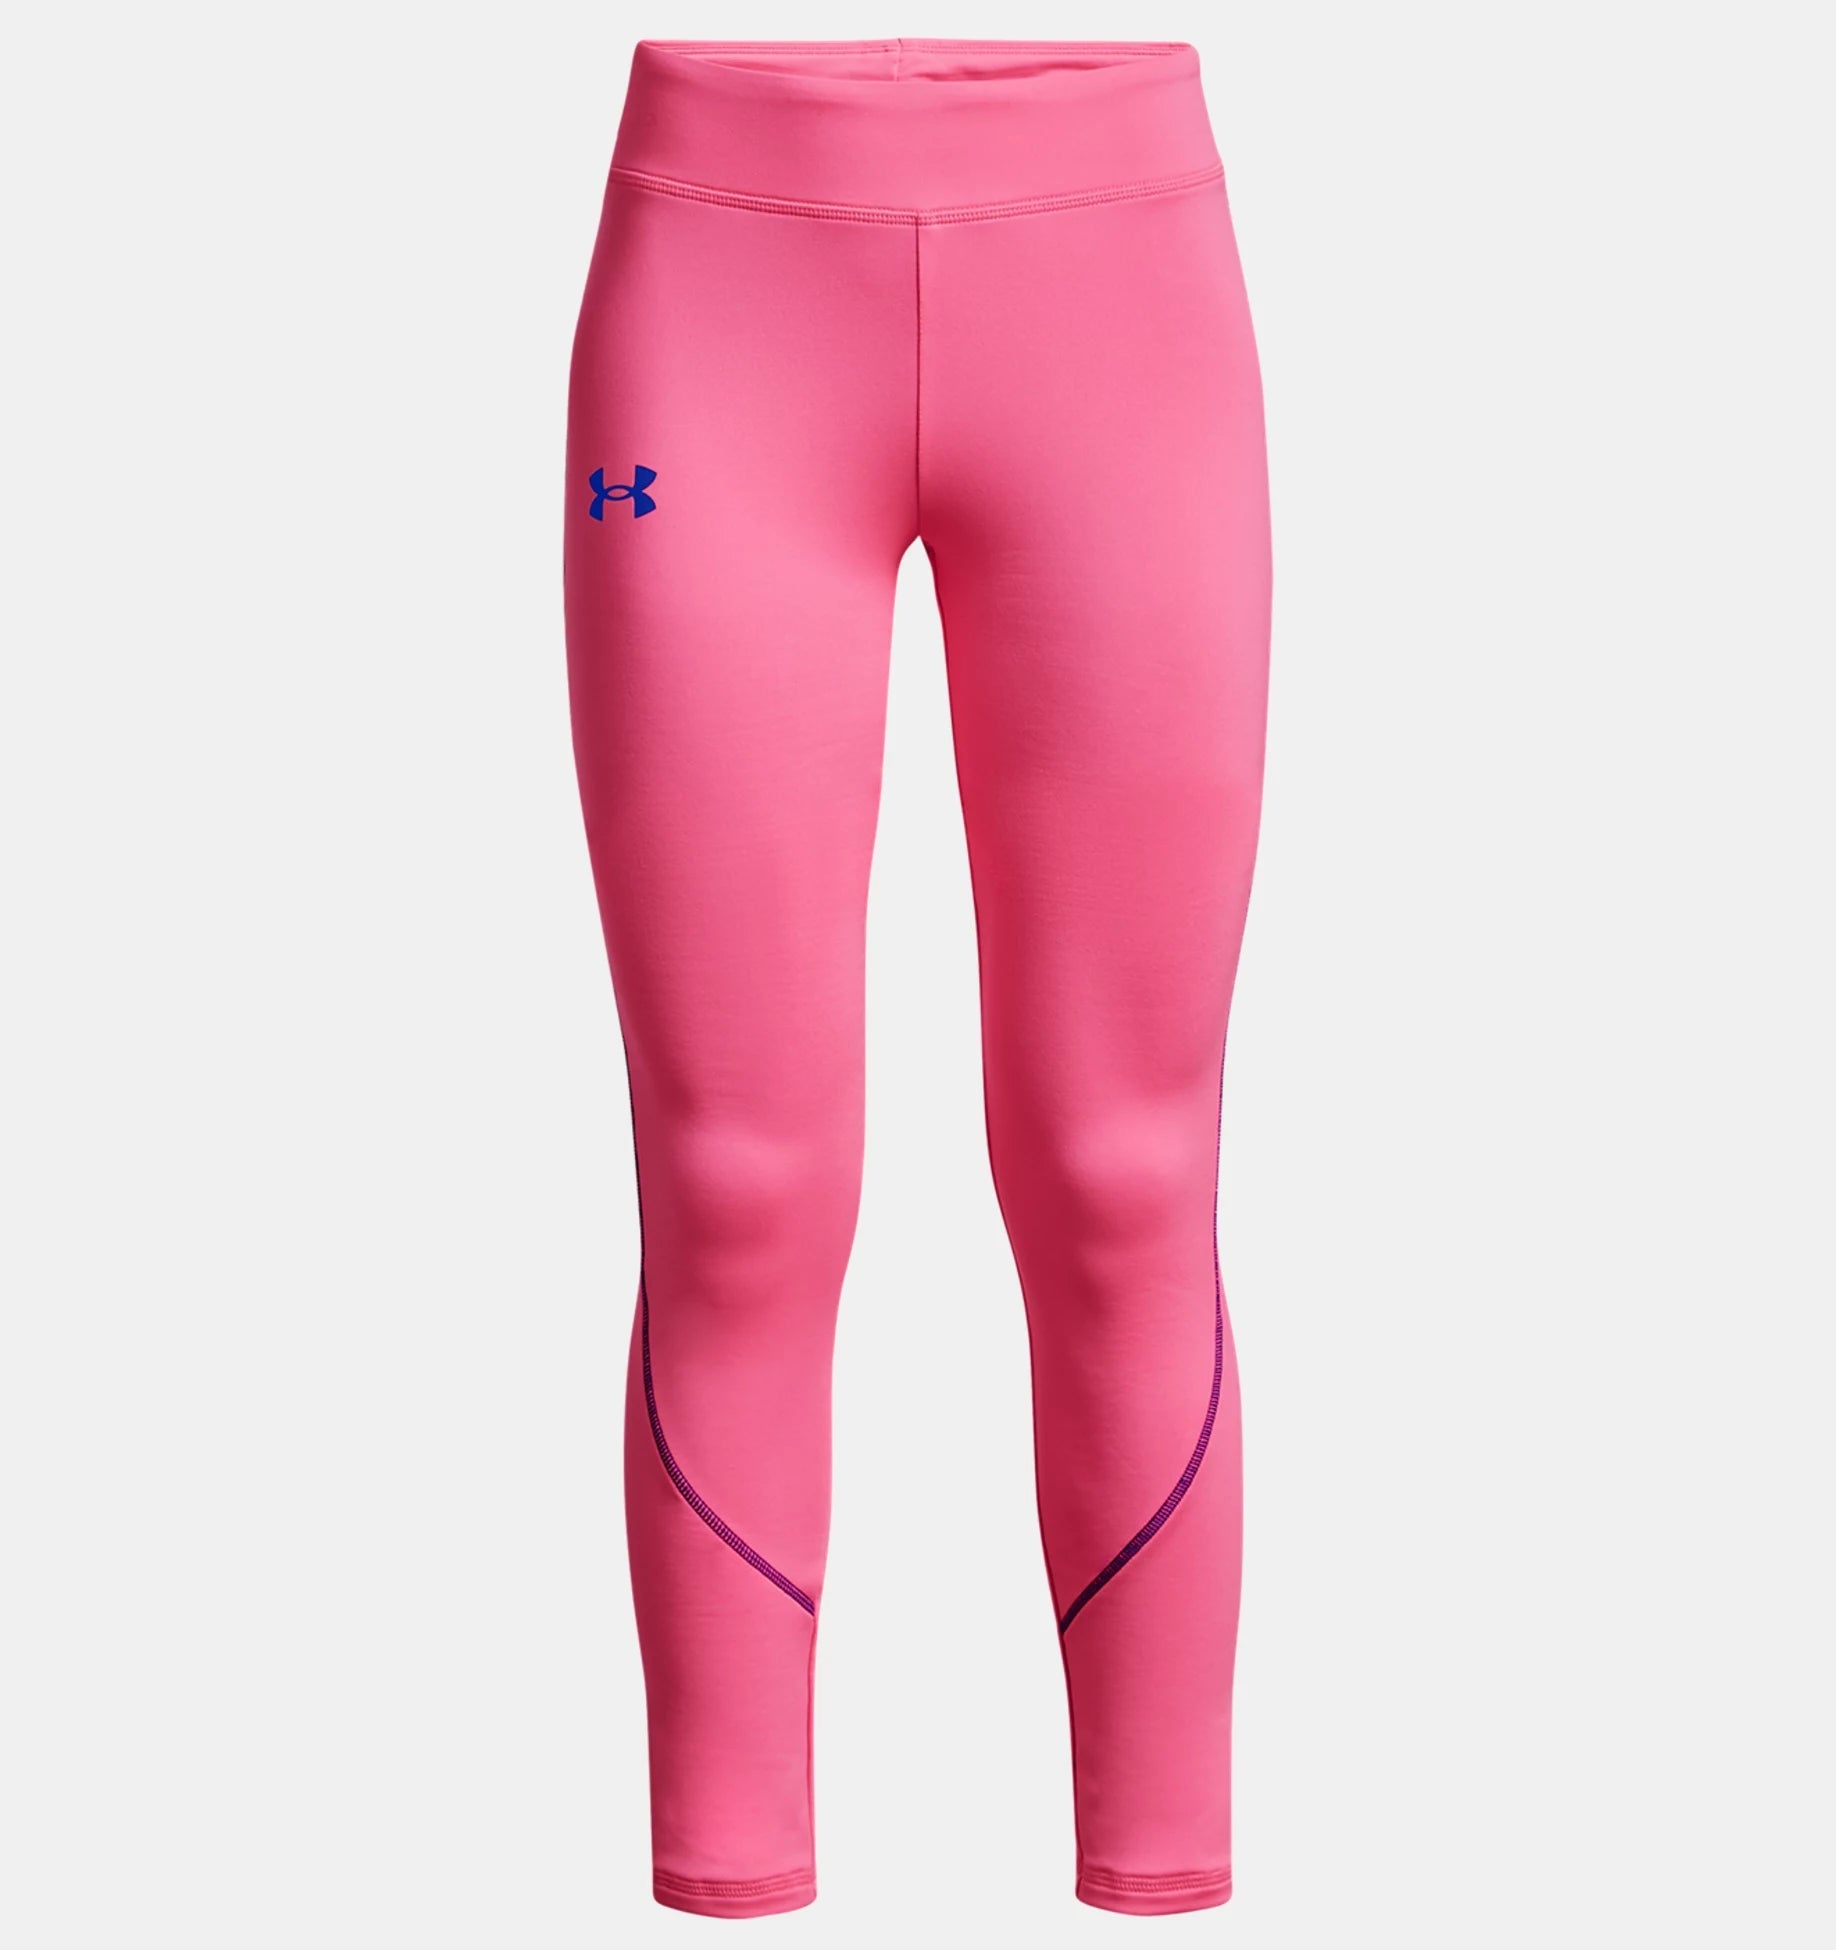 Under Armour Cold Gear Girl's Leggings-Sports Replay - Sports Excellence-Sports Replay - Sports Excellence